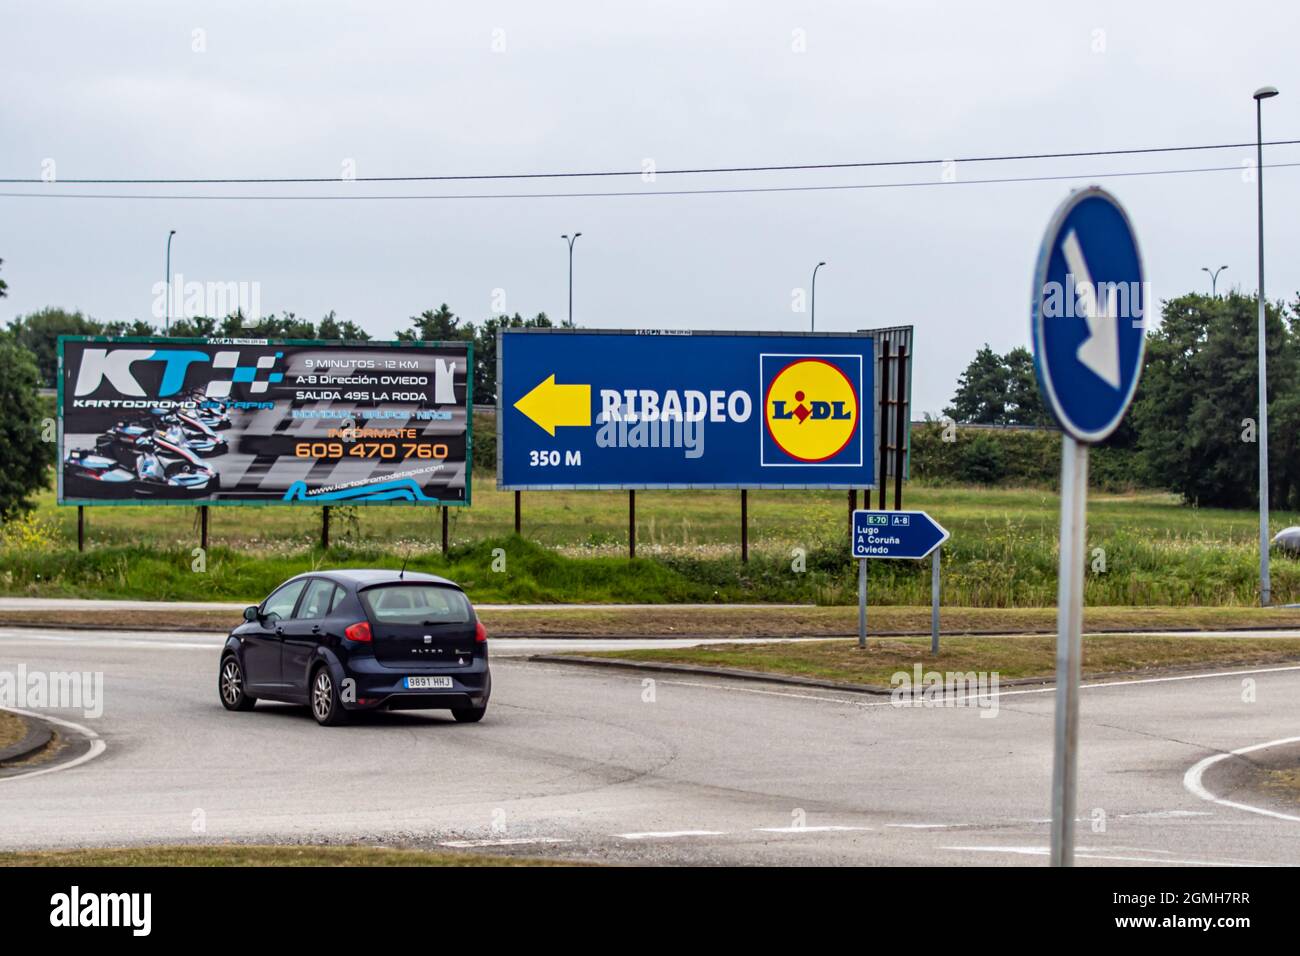 RIBADEO, SPAIN - Aug 31, 2021: a signage of LIDL brand shop on